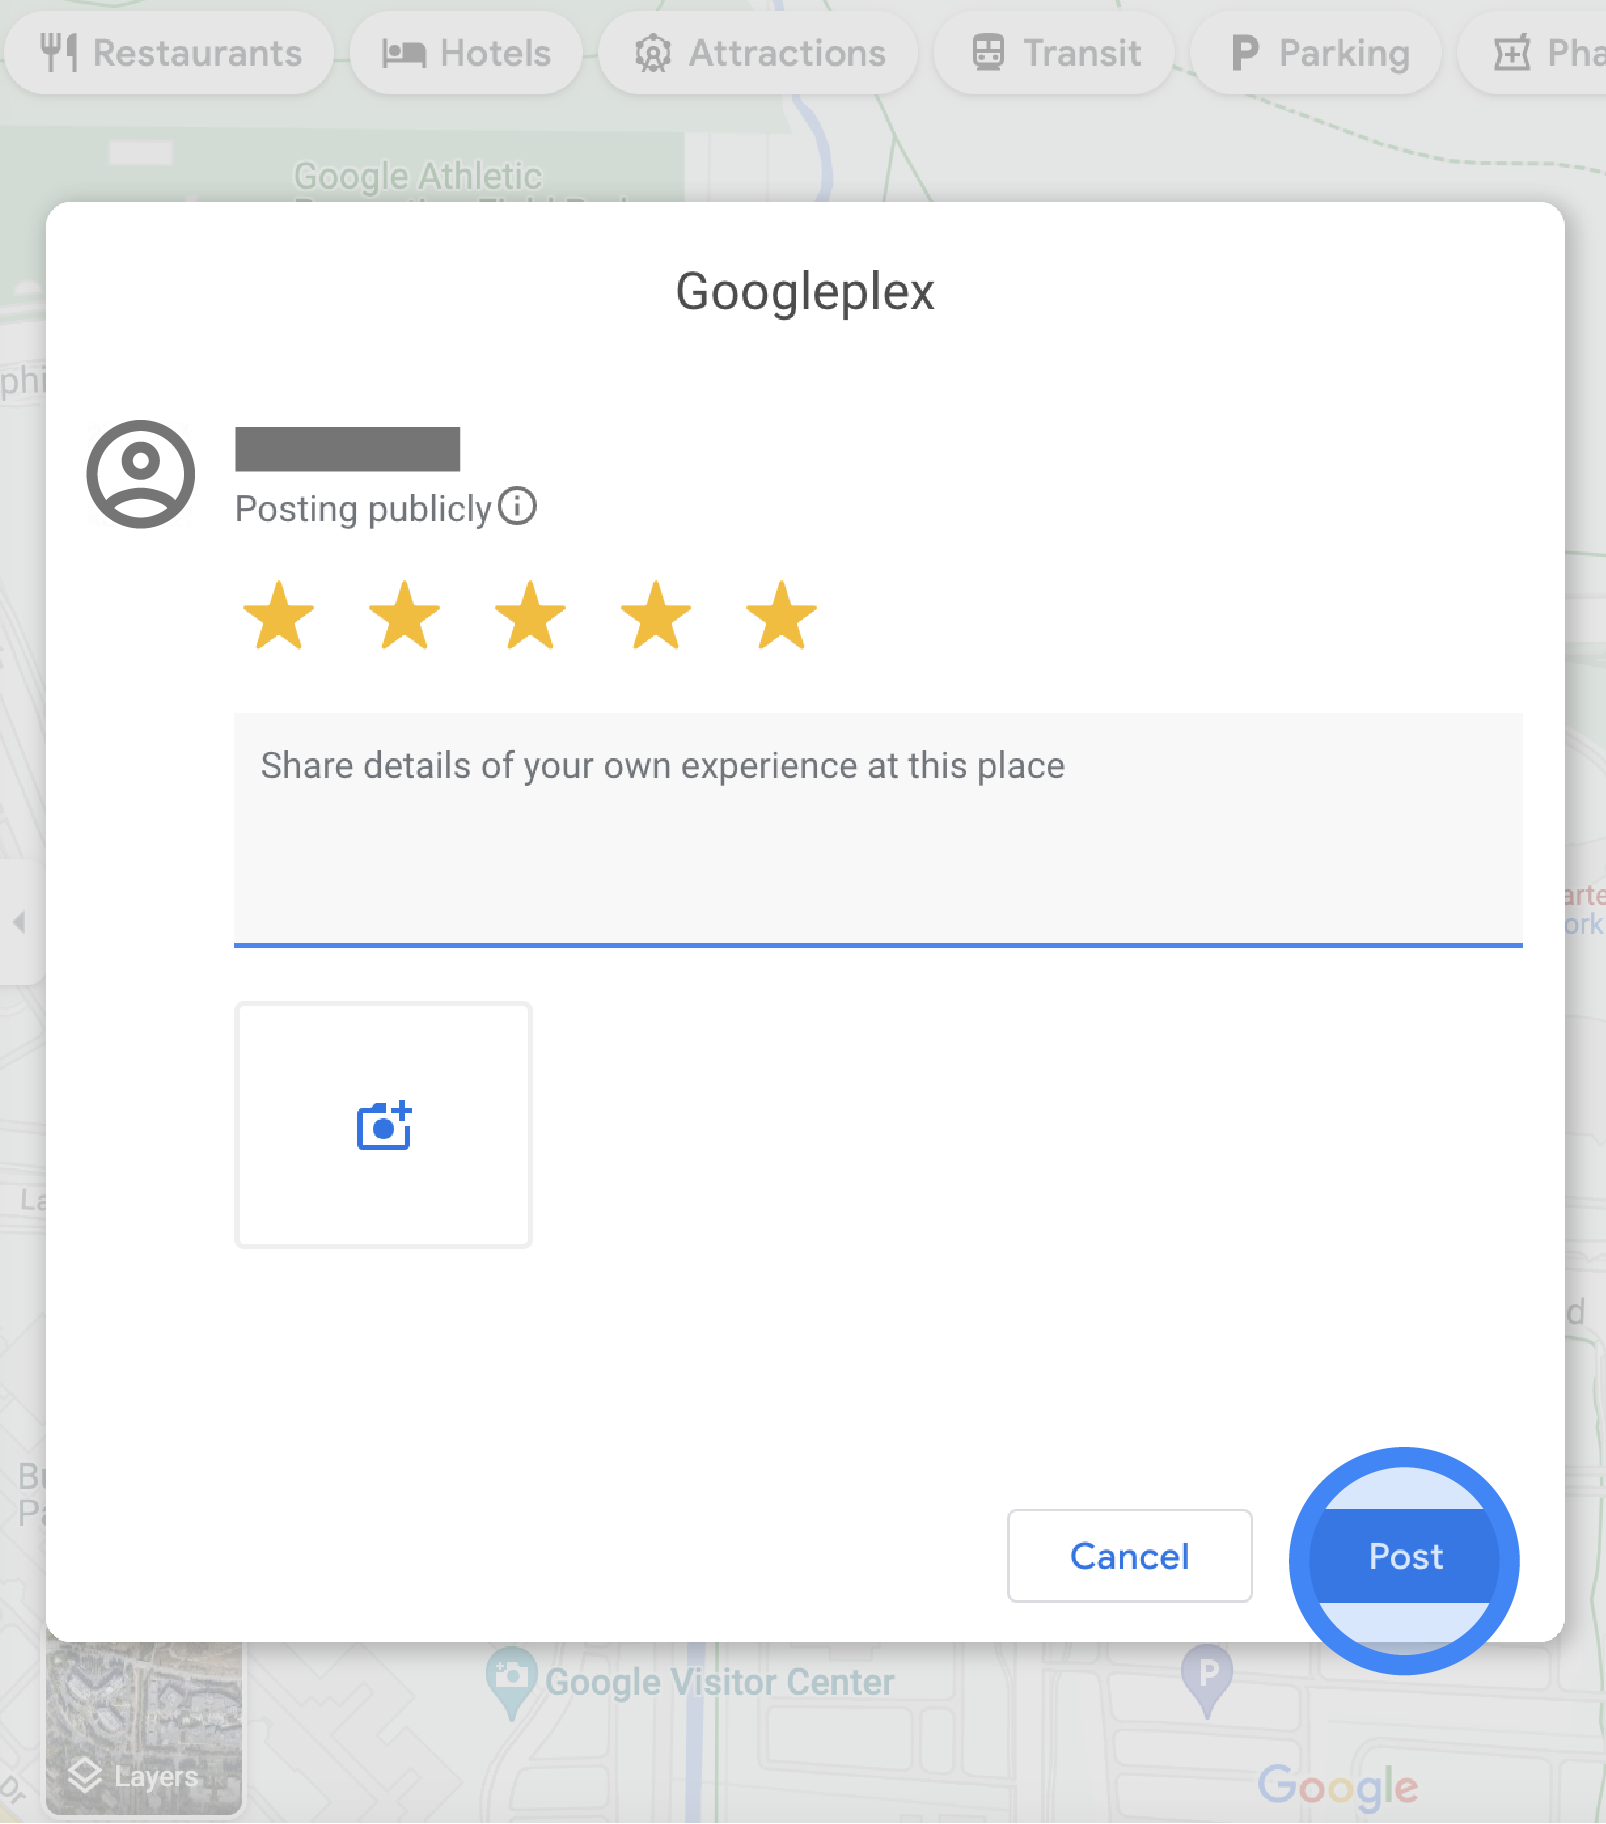 In Google Maps, a pop-up window displays a form to write a review for Googleplex. There are 5 stars selected for the rating, a text field to write review details, and a button with a camera to upload photos. At the bottom of the pop-up window, there is a "Cancel" button and a "Post" button.